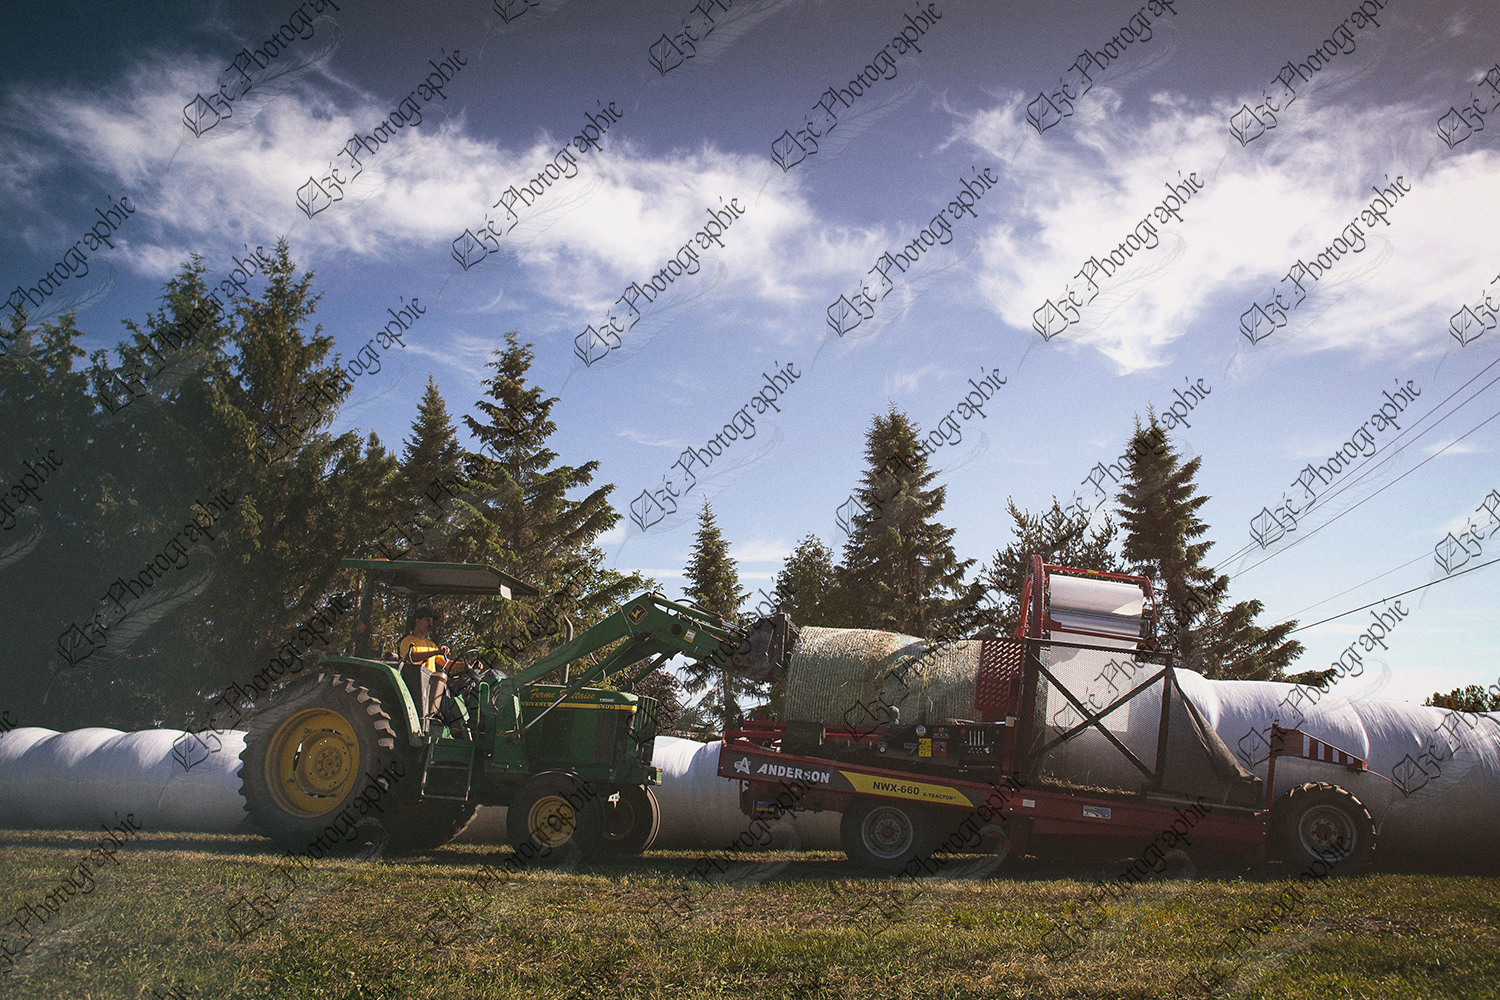 elze_photo_9386_boudin_foin_enrobe_act_wrapping_hay_anderson